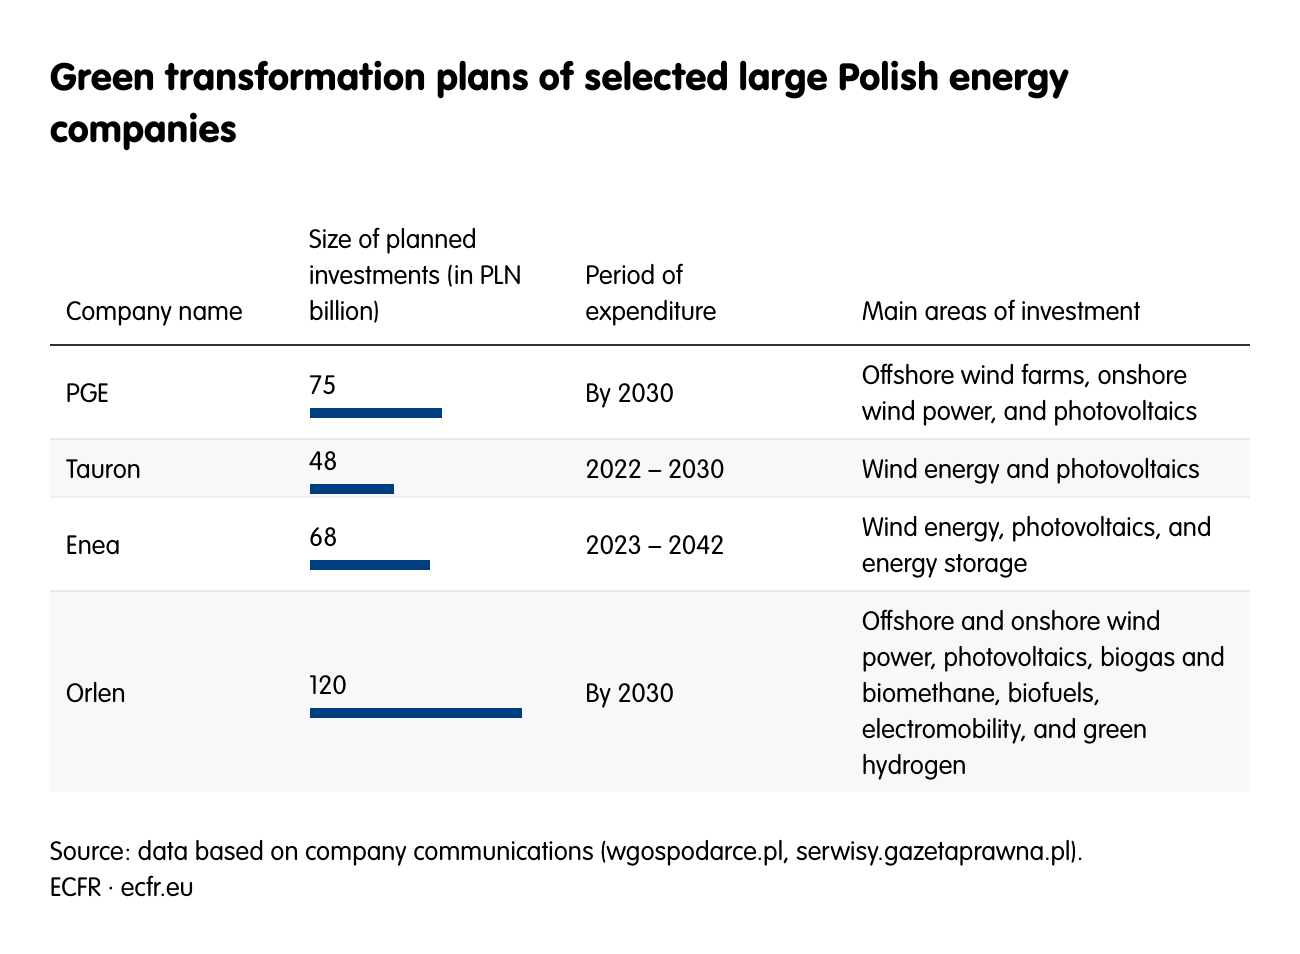 Green transformation plans of selected large Polish energy companies